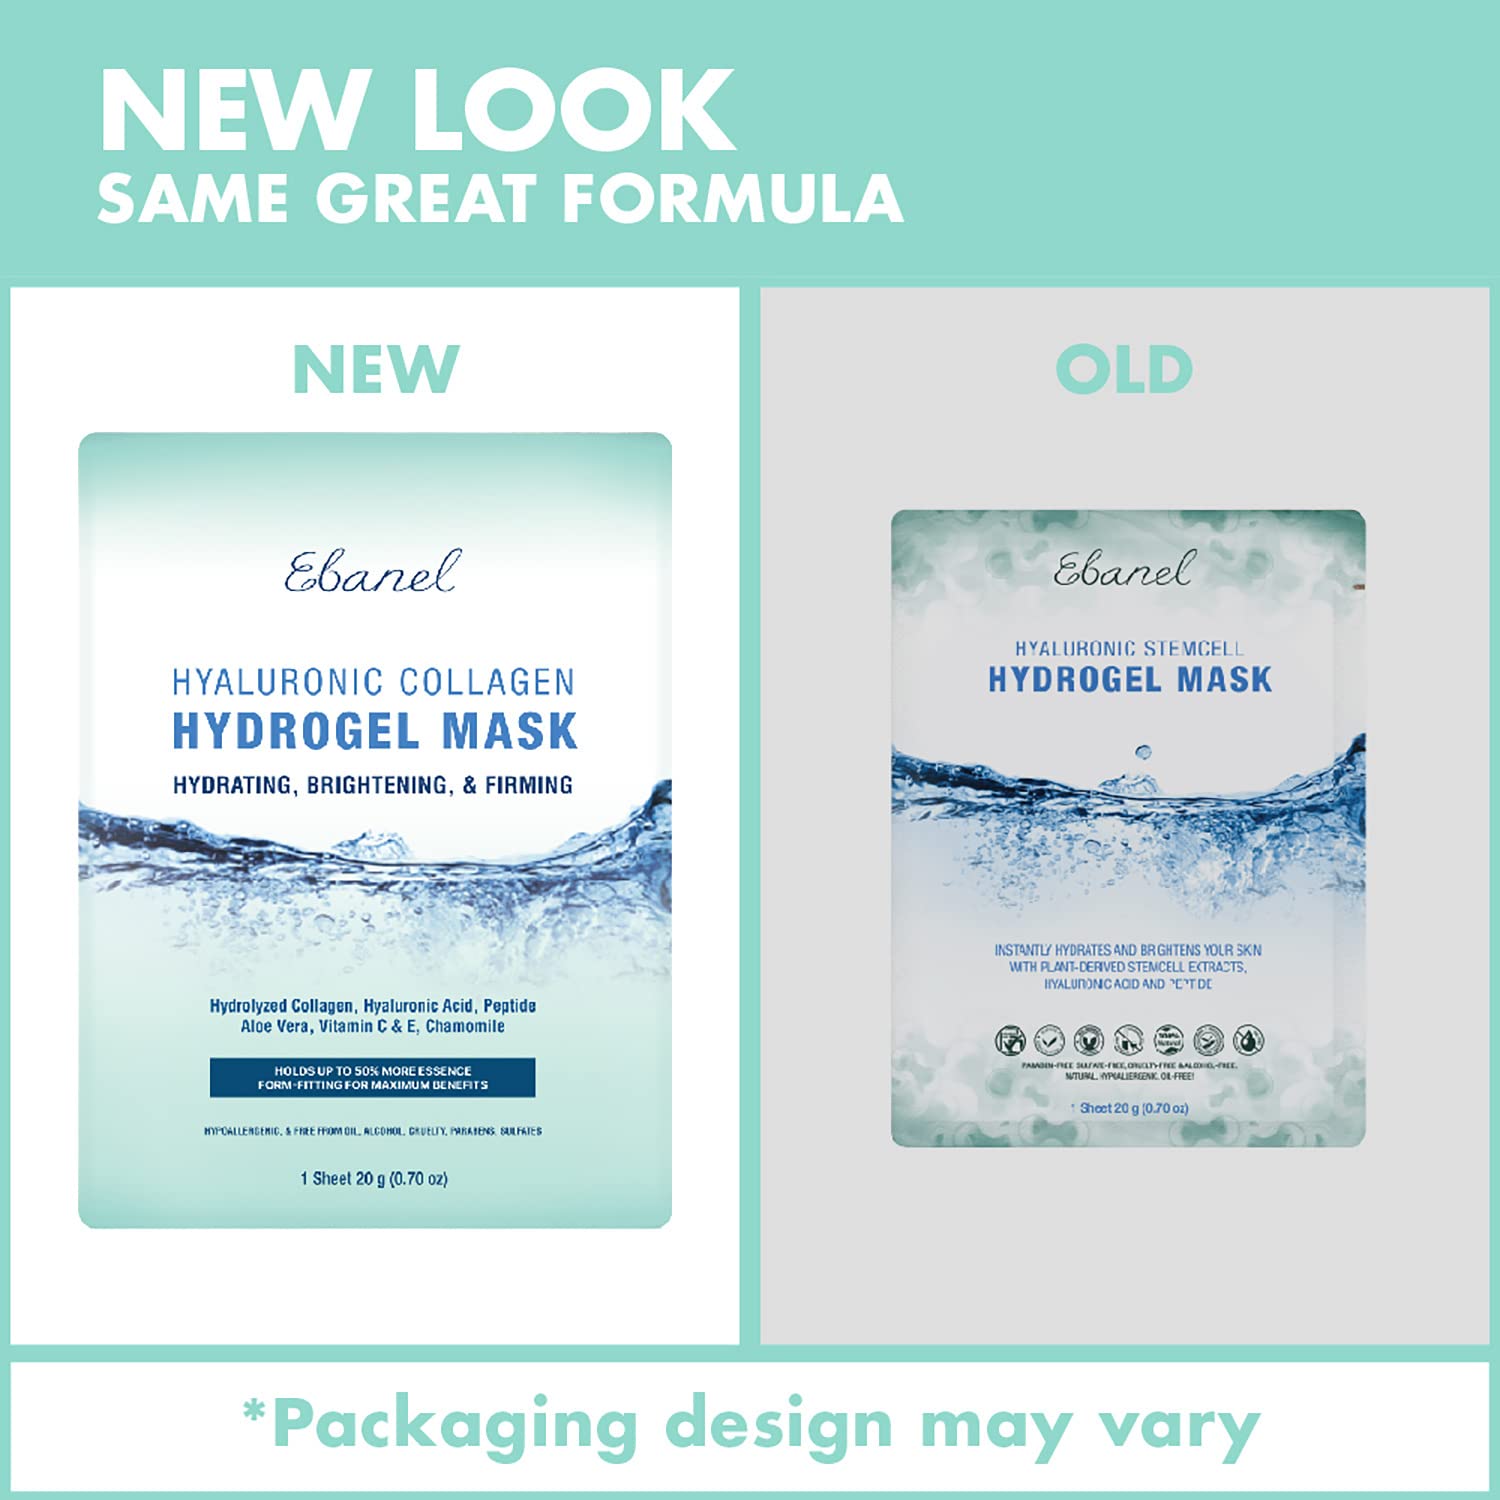 Ebanel 5-Pack Hydrogel Collagen Mask for Face, Instant Brightening Hydrating Face Mask Sheet Mask for Firming, Lifting Anti Aging Anti Wrinkle with Hyaluronic Acid, Peptide, Aloe Vera, Vitamin C & E : Beauty & Personal Care